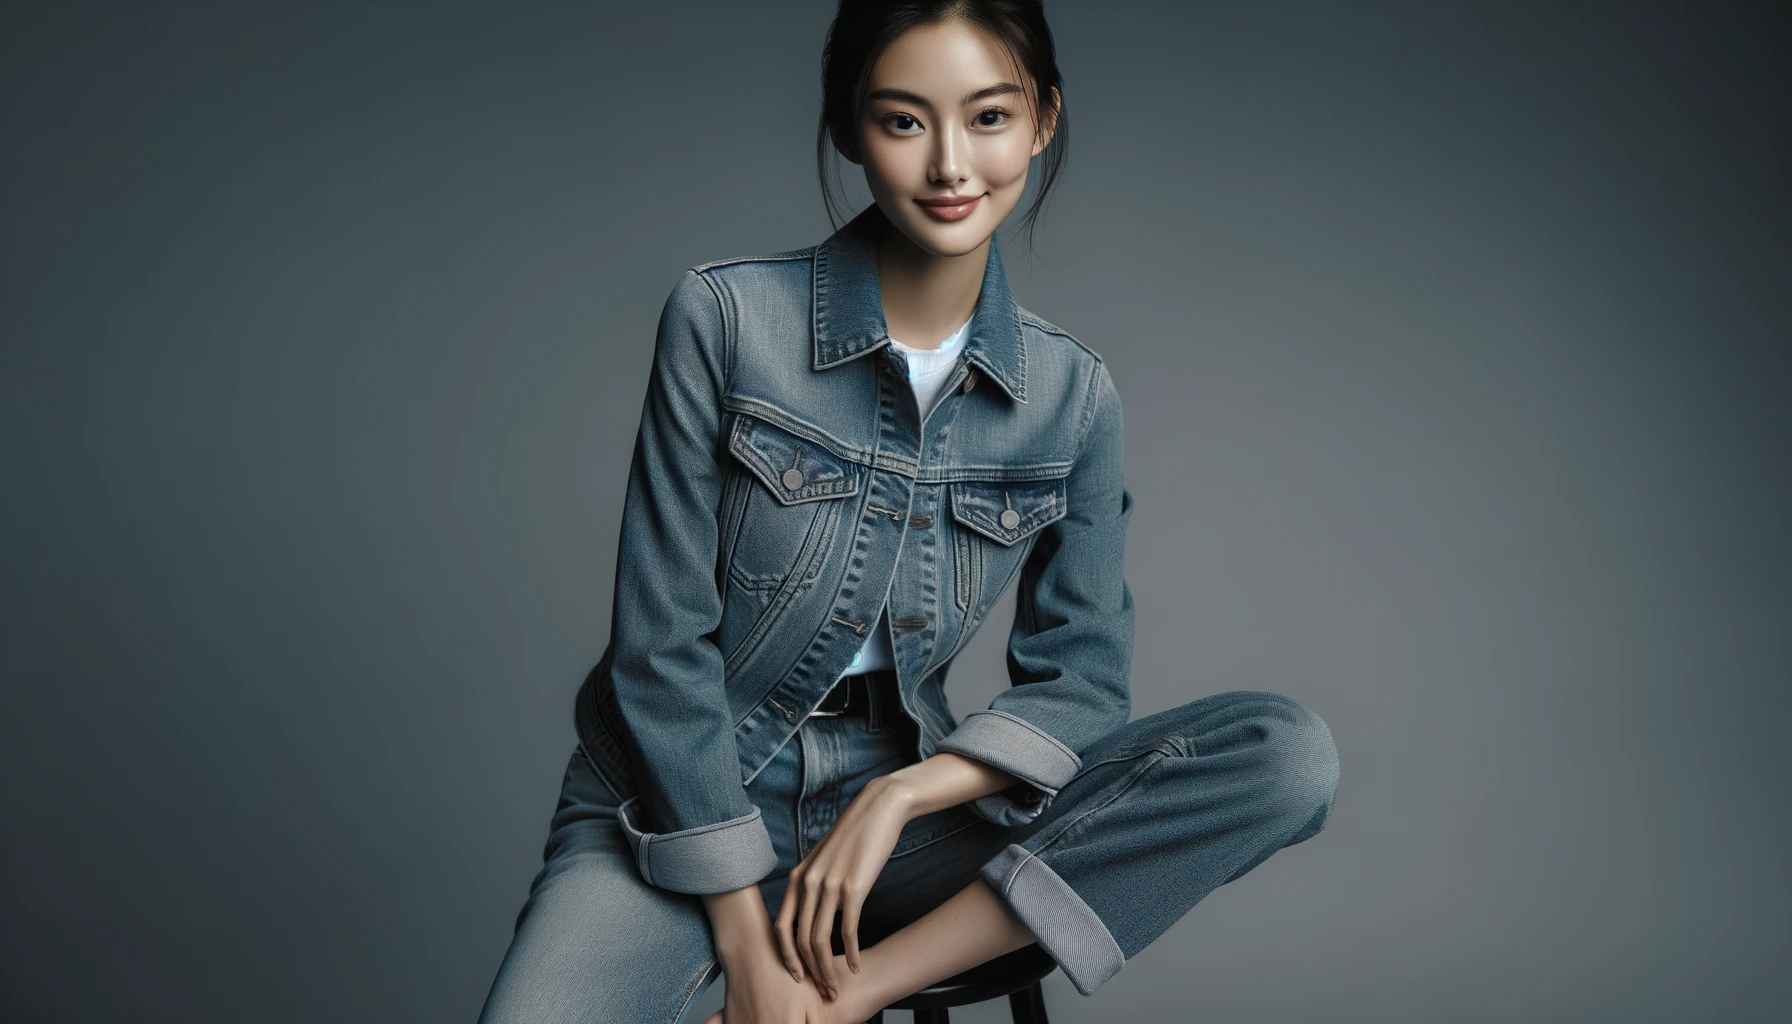 Full body portrait of an elegant Chinese model wearing a denim jacket over a white t-shirt, seated on a stool against a muted grey background.